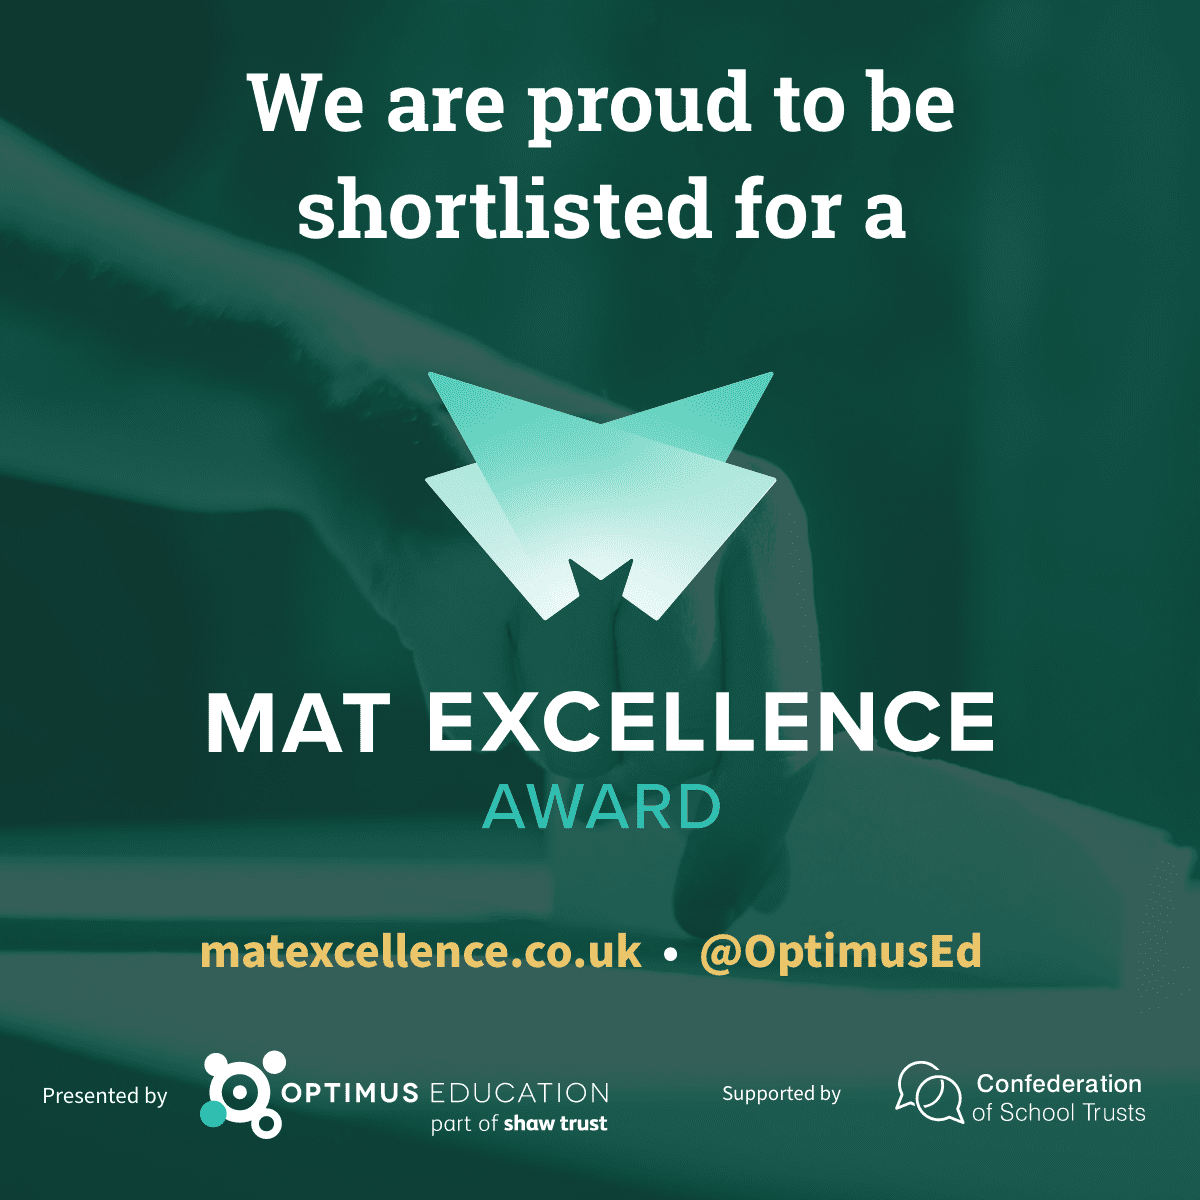 We are shortlisted for two MAT Excellence Awards!